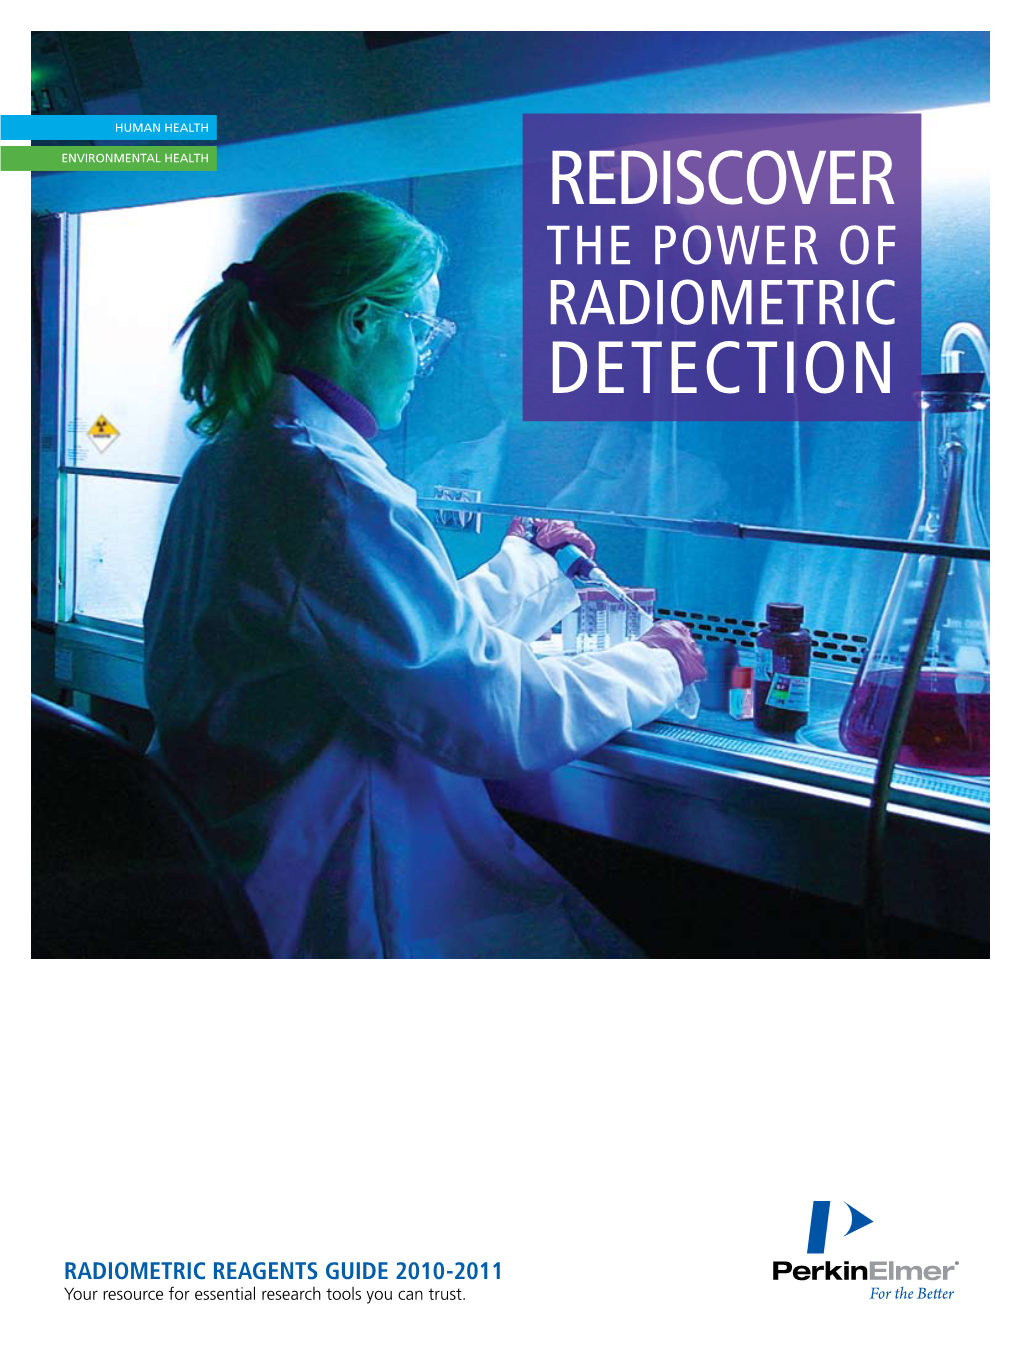 Rediscover the POWER of Radiometric Detection